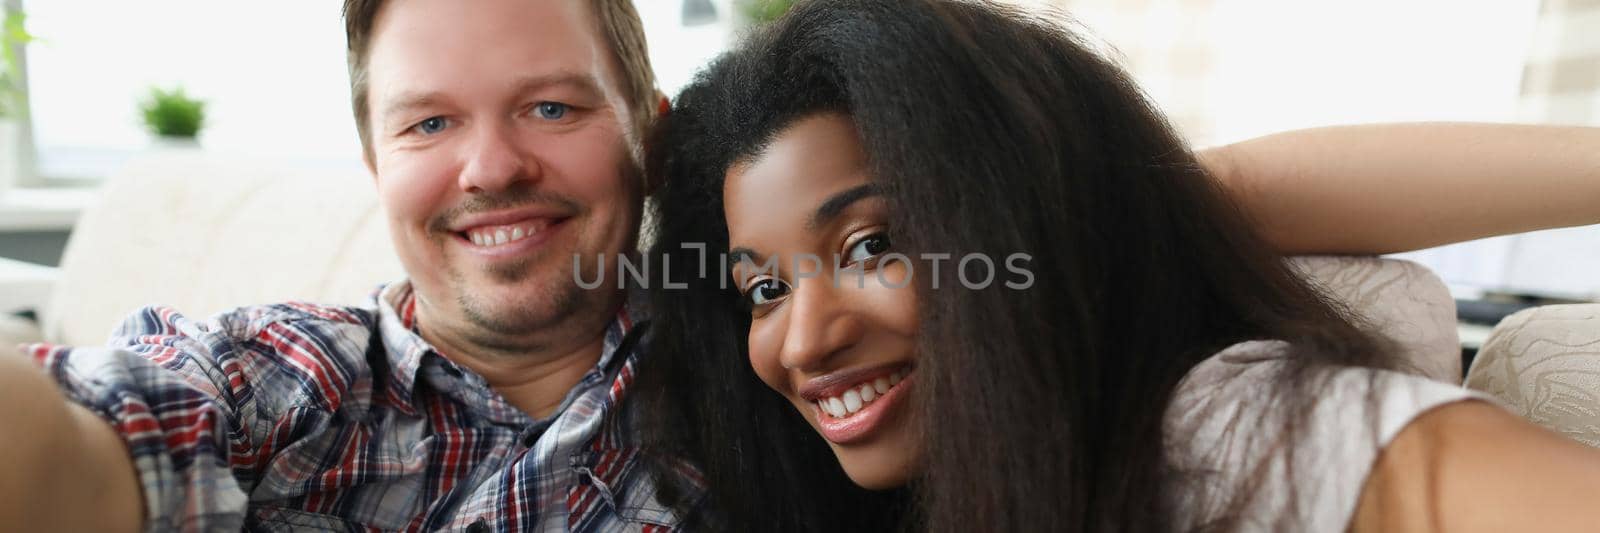 Portrait of friends taking selfie on sofa. Middle aged man and latinoamerican woman smiling for picture, warm friends meeting. Friendship, pastime, fun and happiness concept